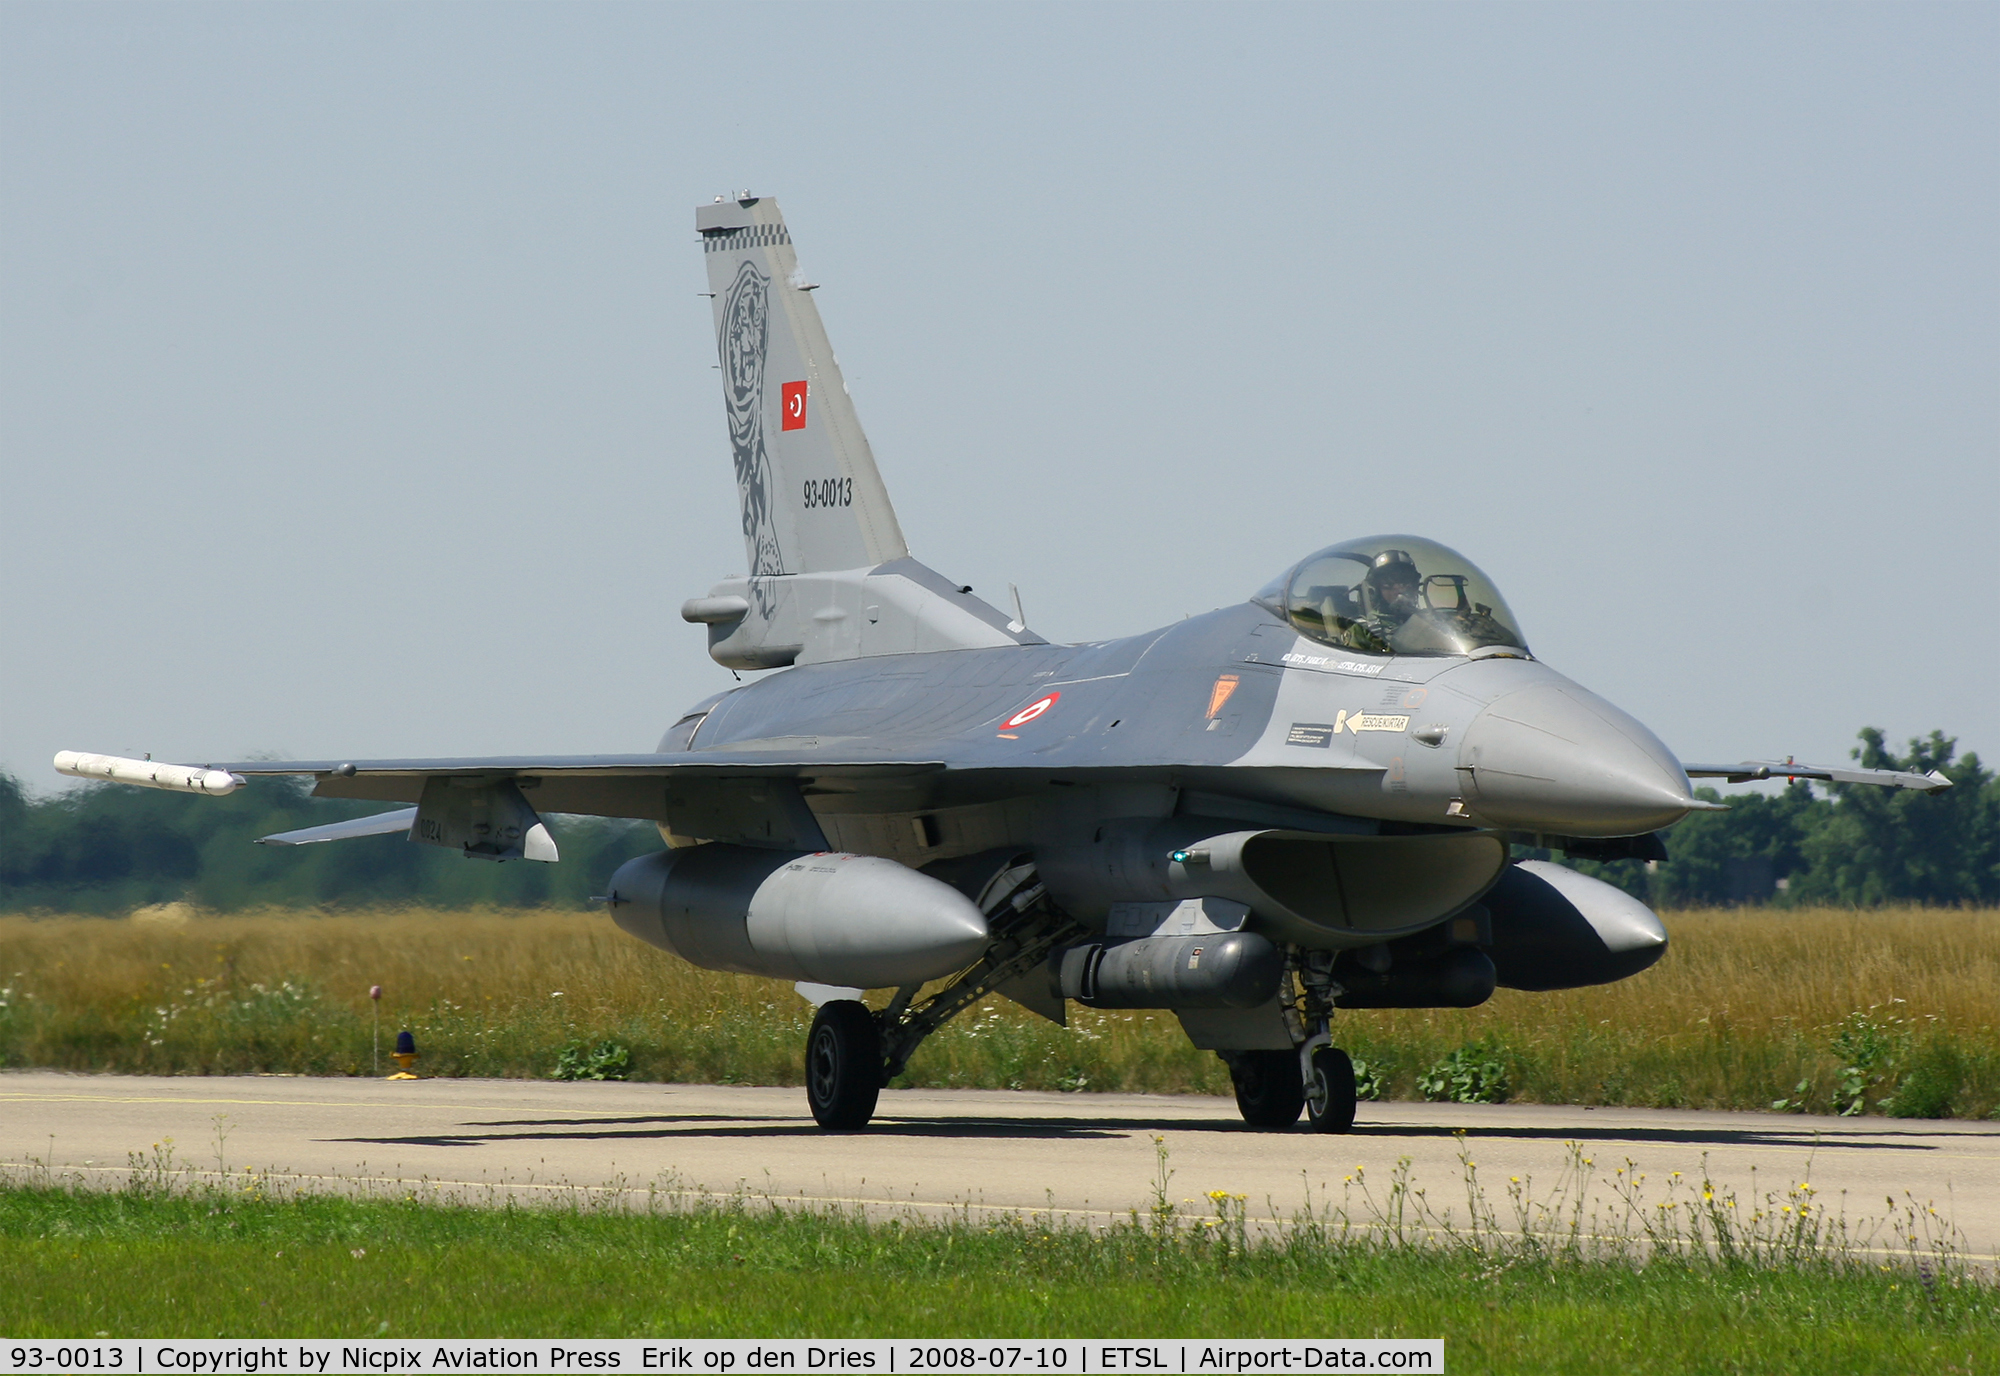 93-0013, Lockheed F-16C Fighting Falcon C/N 4R-135, 93-0013 is seen here on the taxitrack of Lechfeld AB during the exercise ELITE '08.